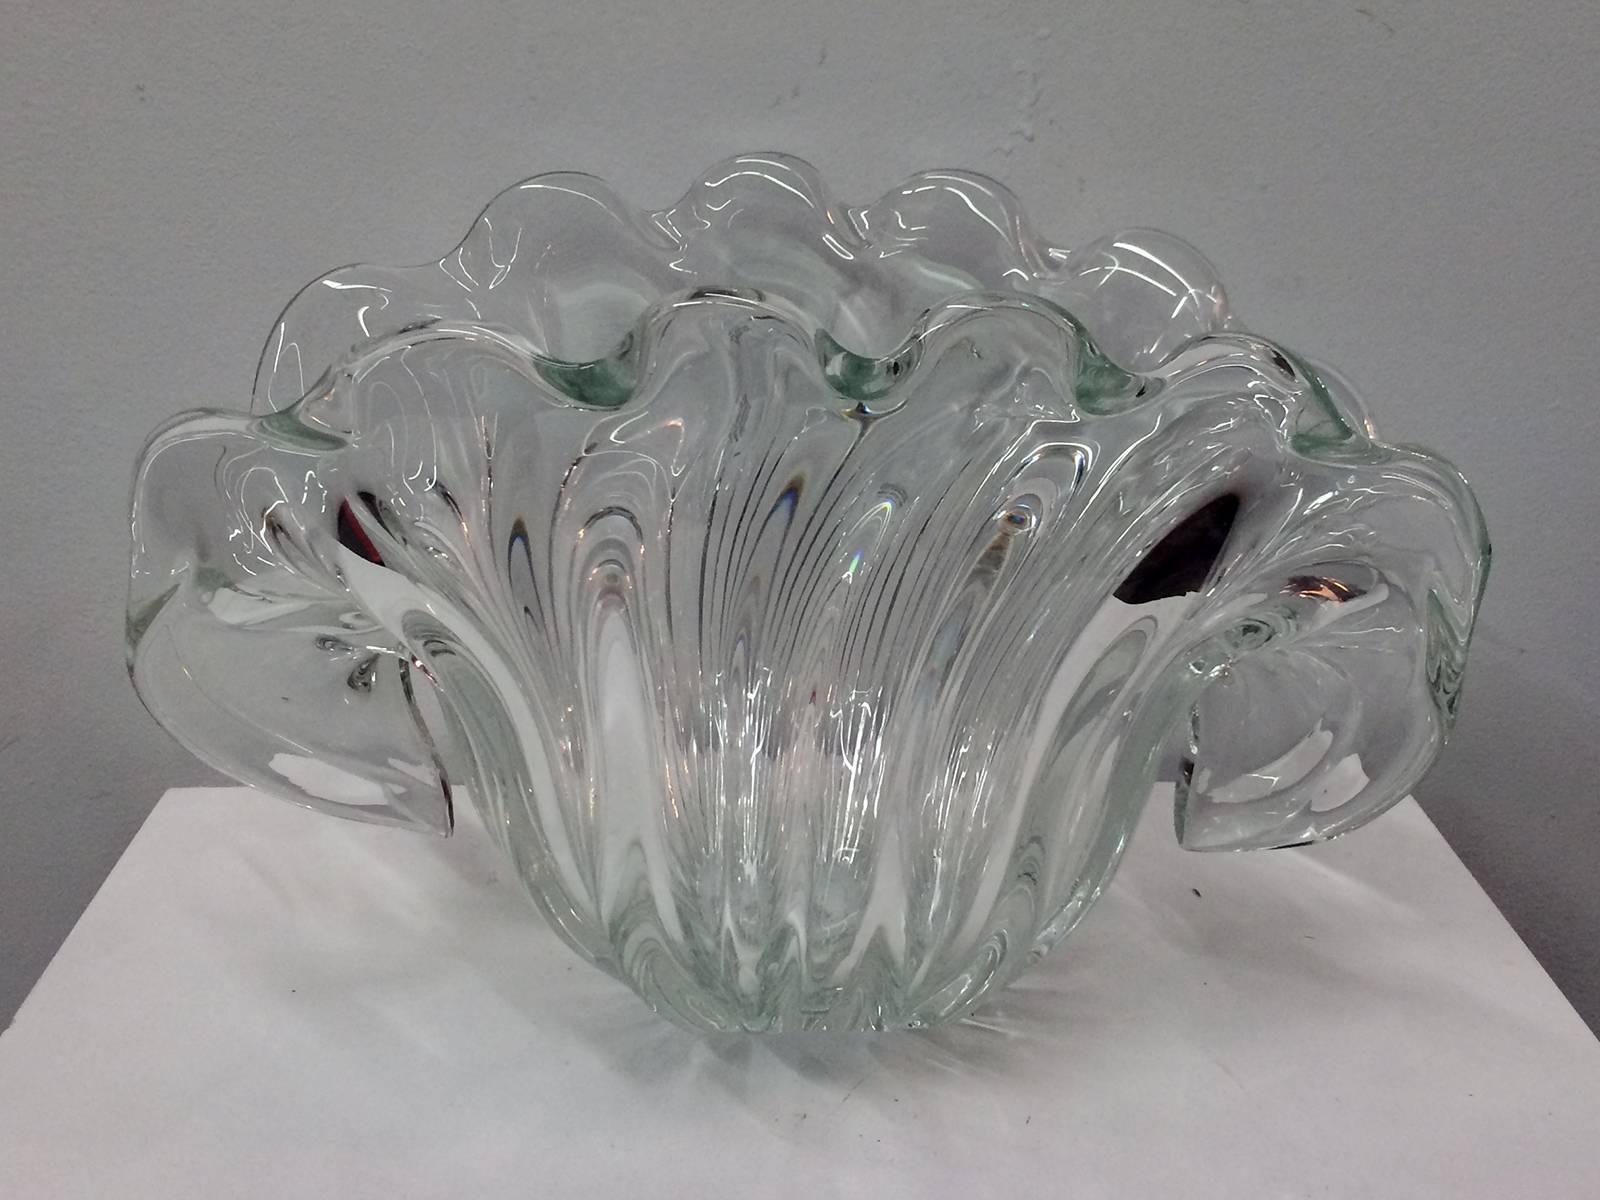 Vintage Italian Murano mouth blown glass clam shaped bowl by Venetian Company Formia. This interesting piece has two possible resting positions. The bowl rests comfortably on its base in a vertical position and then also at a 45- degree angle on a